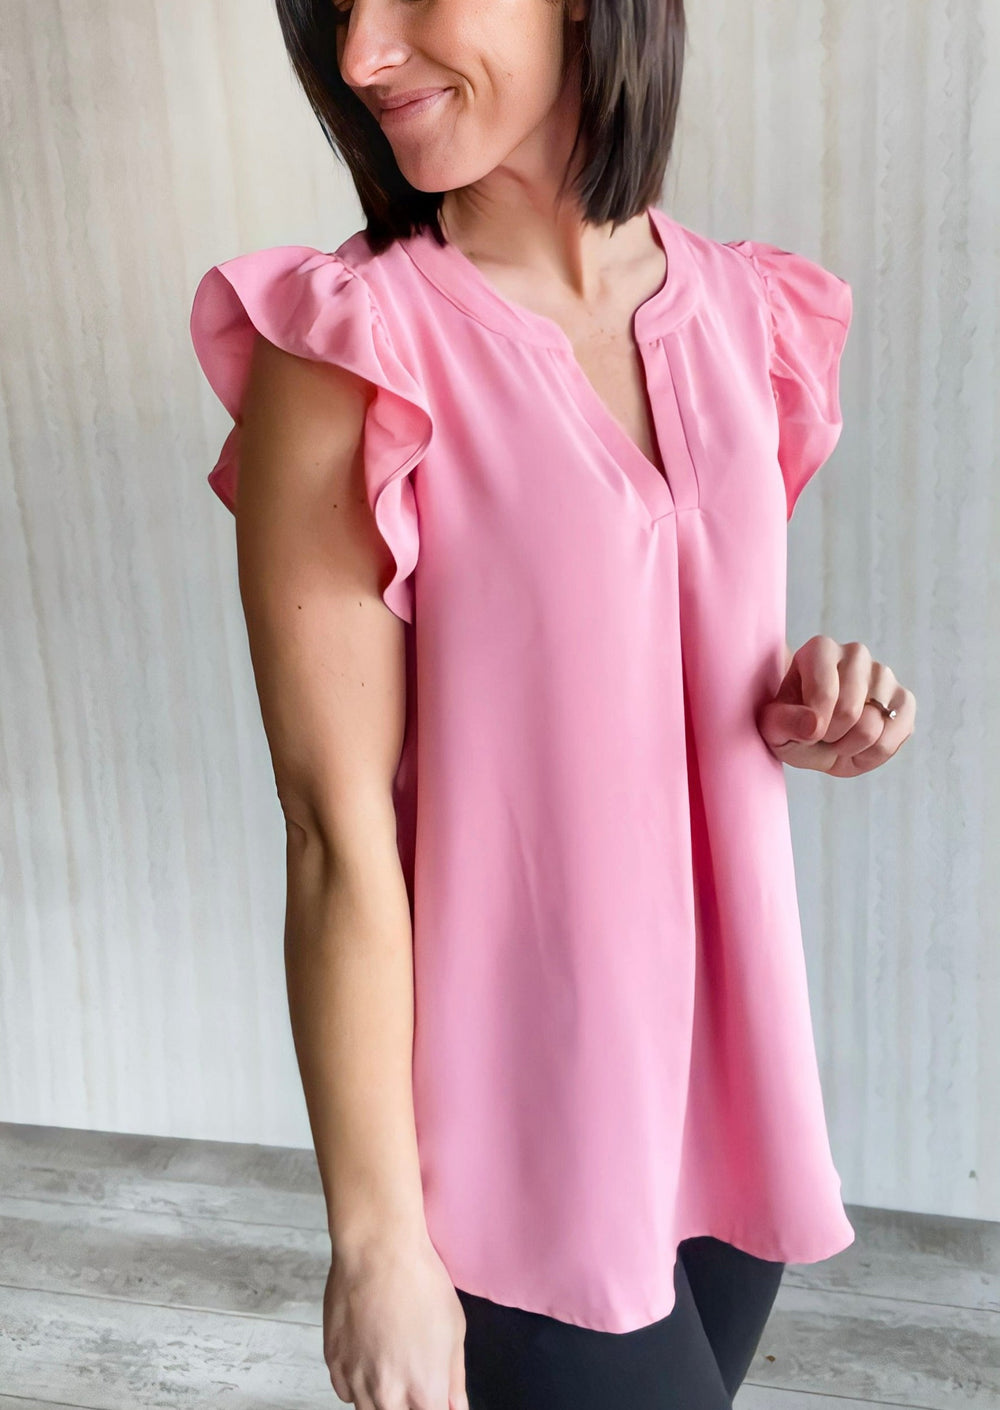 Pink Dress Blouse with Ruffle Cap Sleeve paired with Black Dress Pants